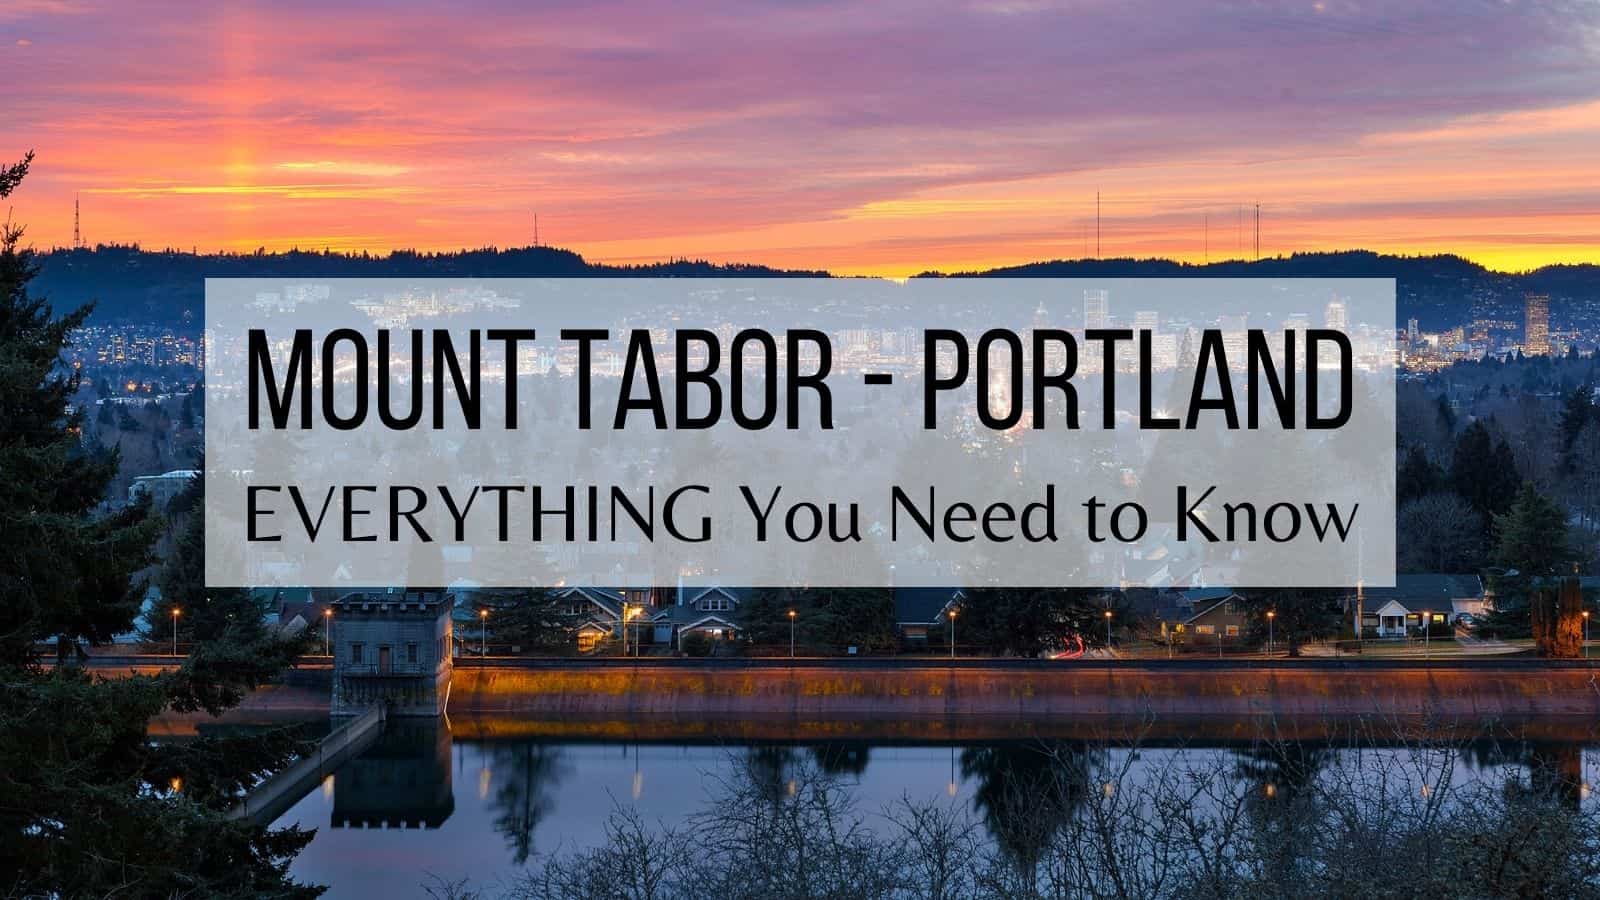 Mount Tabor - Portland - EVERYTHING You Need to Know